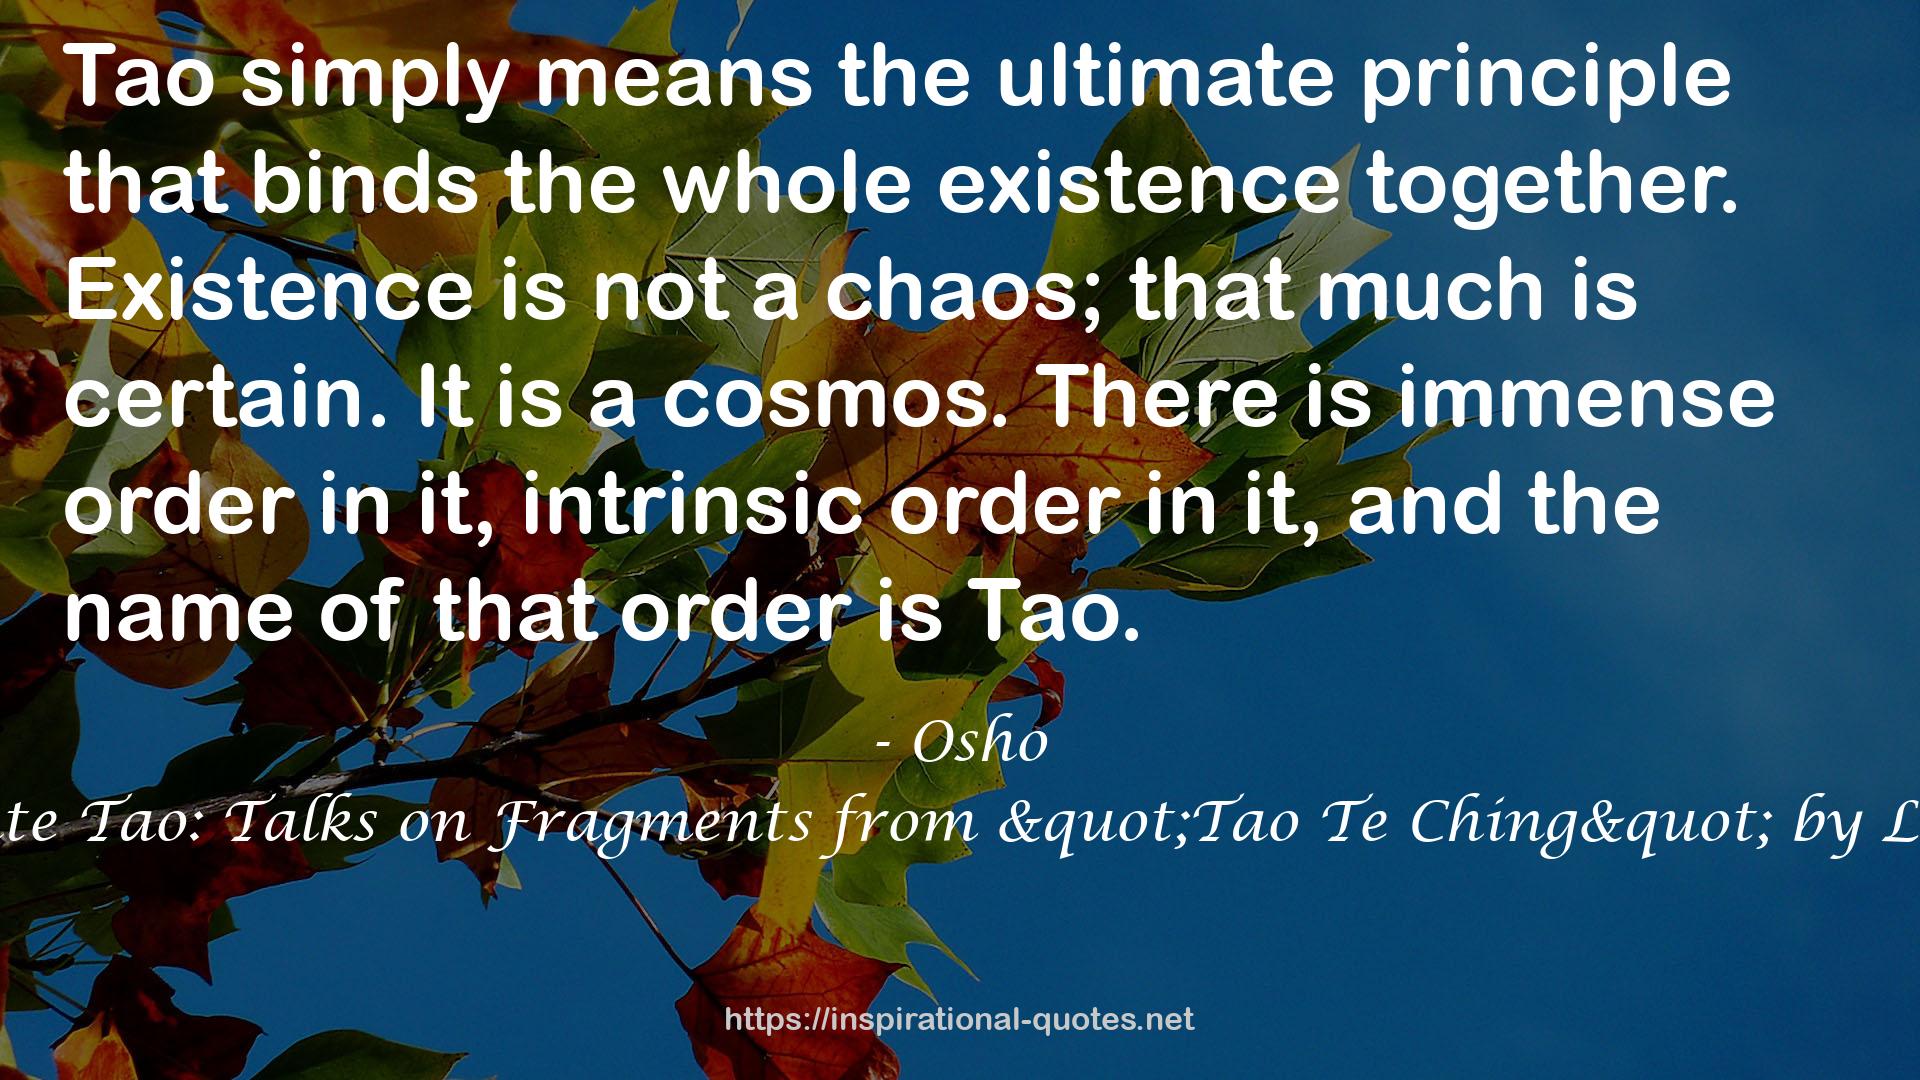 Absolute Tao: Talks on Fragments from "Tao Te Ching" by Lao Tzu QUOTES